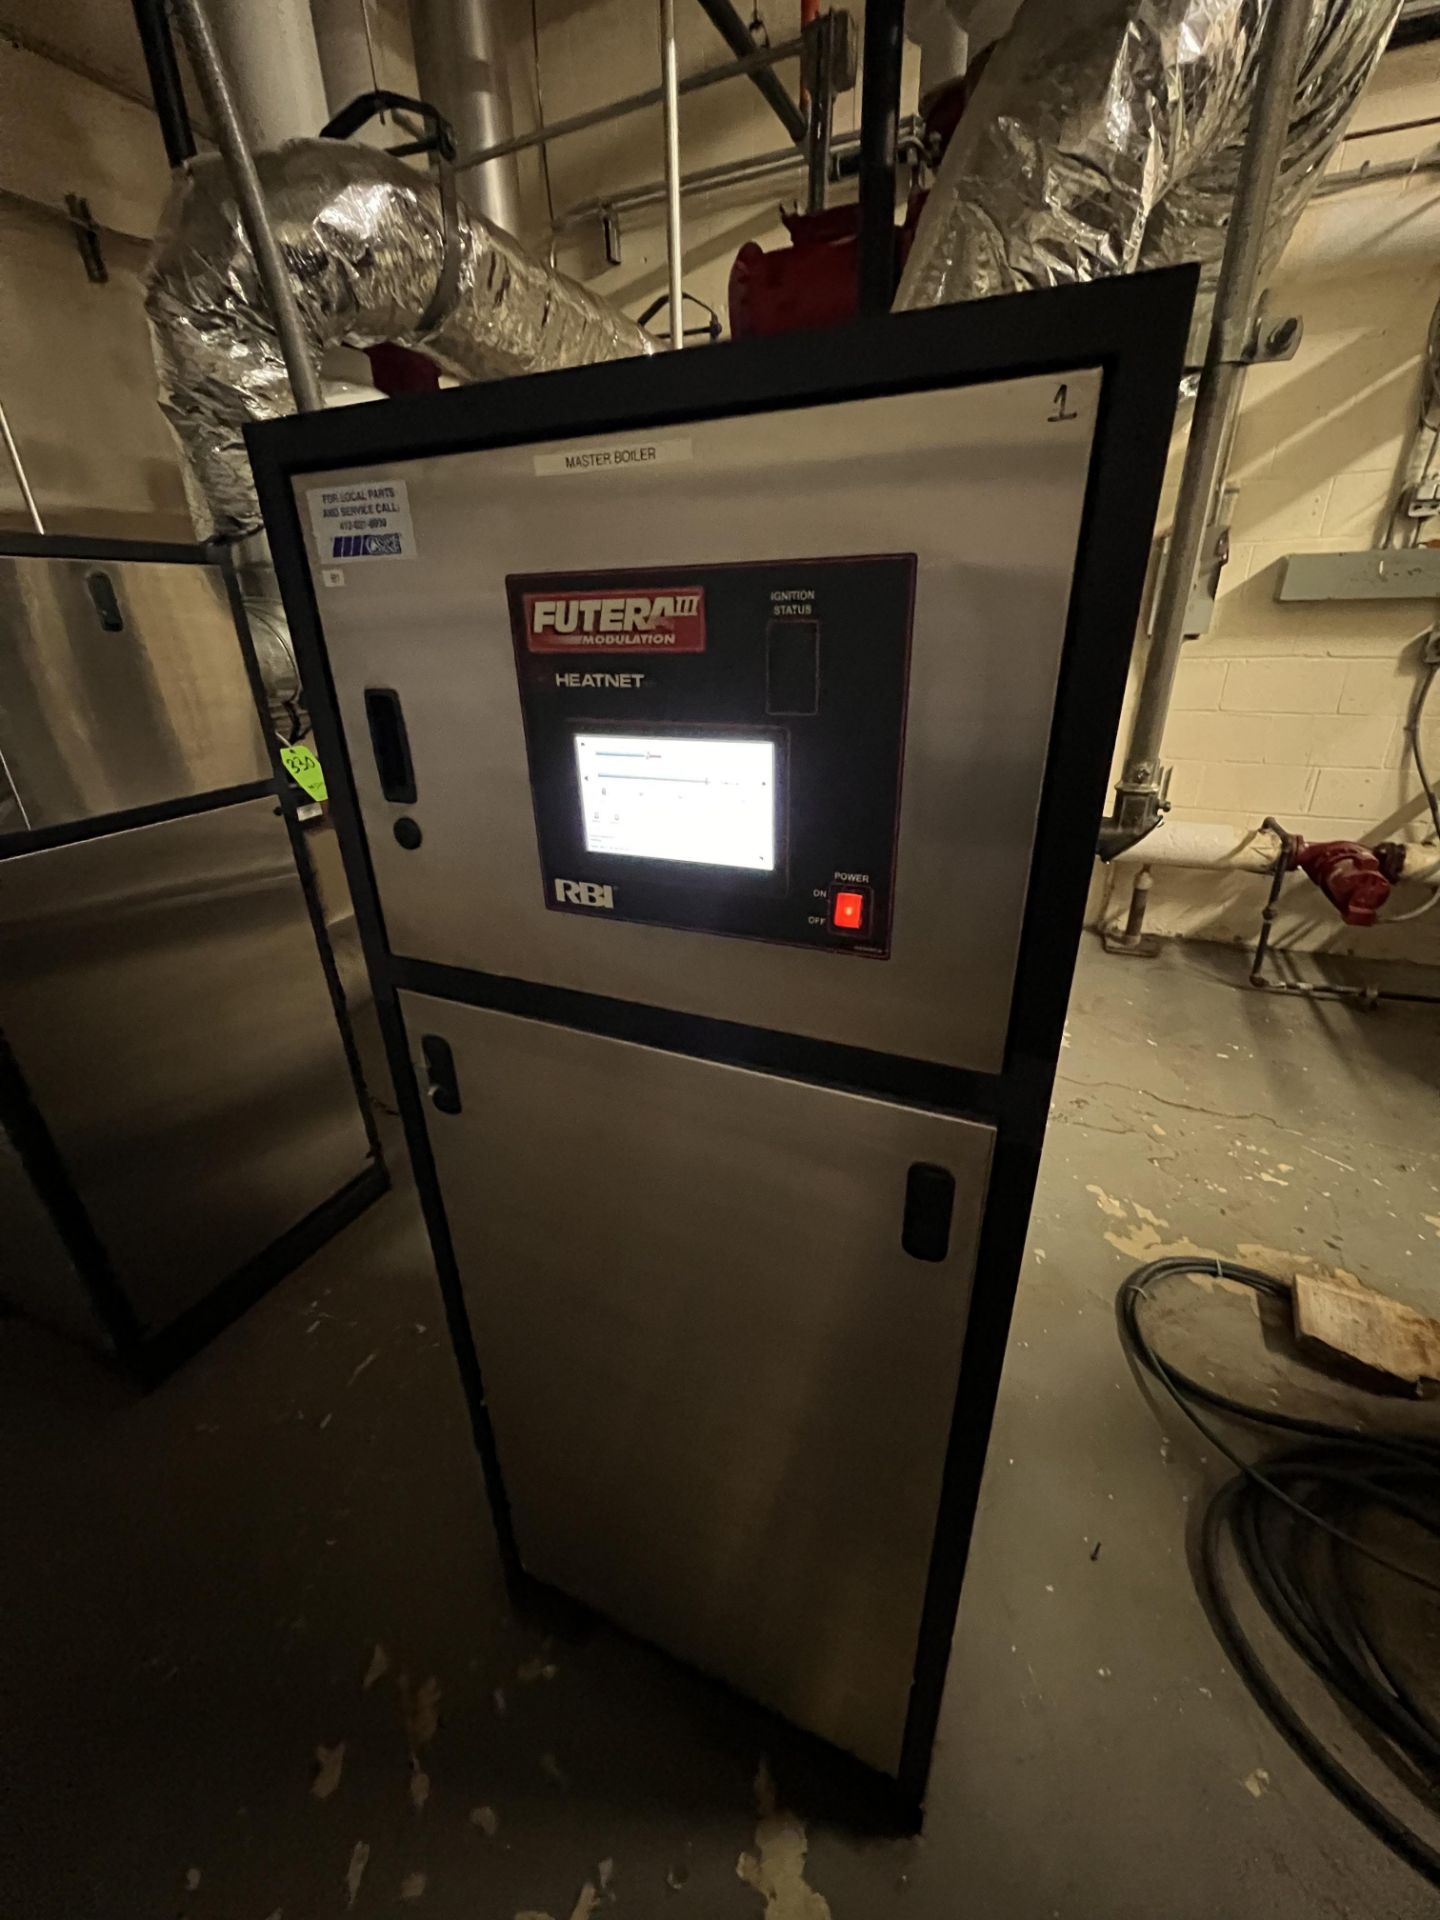 RBI FUTERA 3 NATURAL GAS BOILER, MODEL MB1000, S/N 122087110, 160 PSI, PREVIOUSLY OPERATING IN - Image 2 of 9